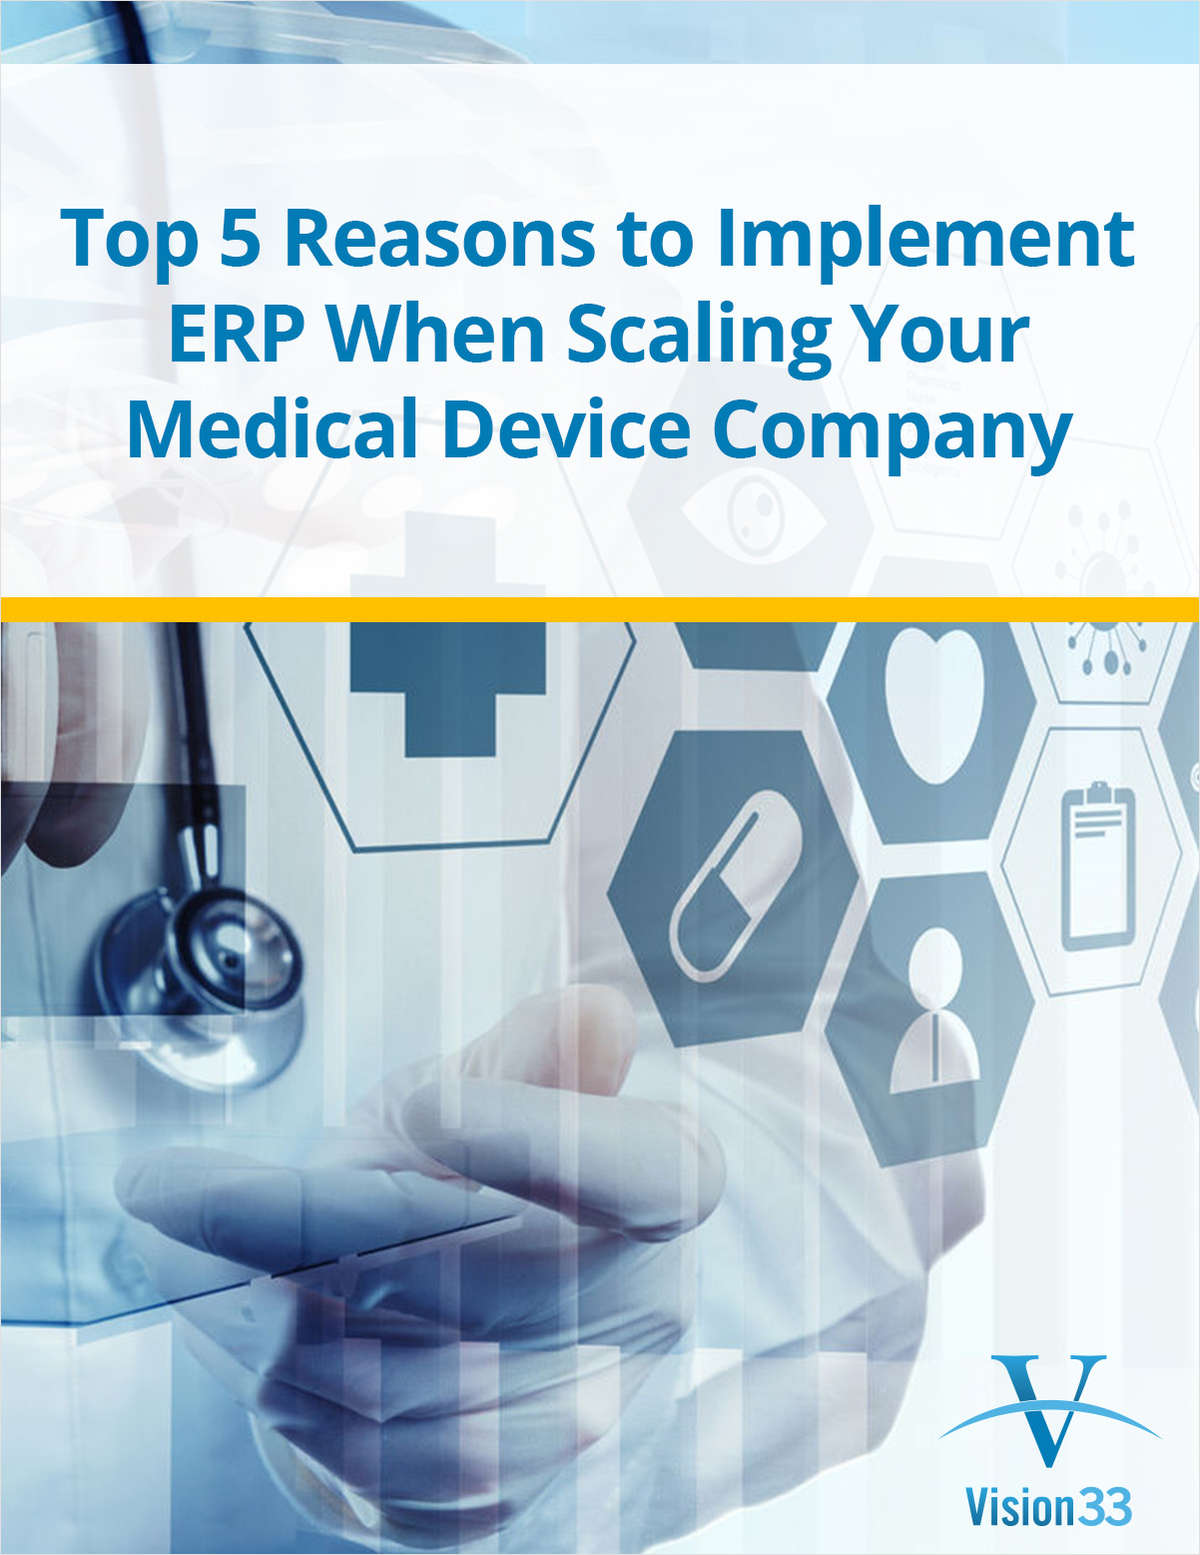 5 Reasons to implement ERP when scaling your medical device company